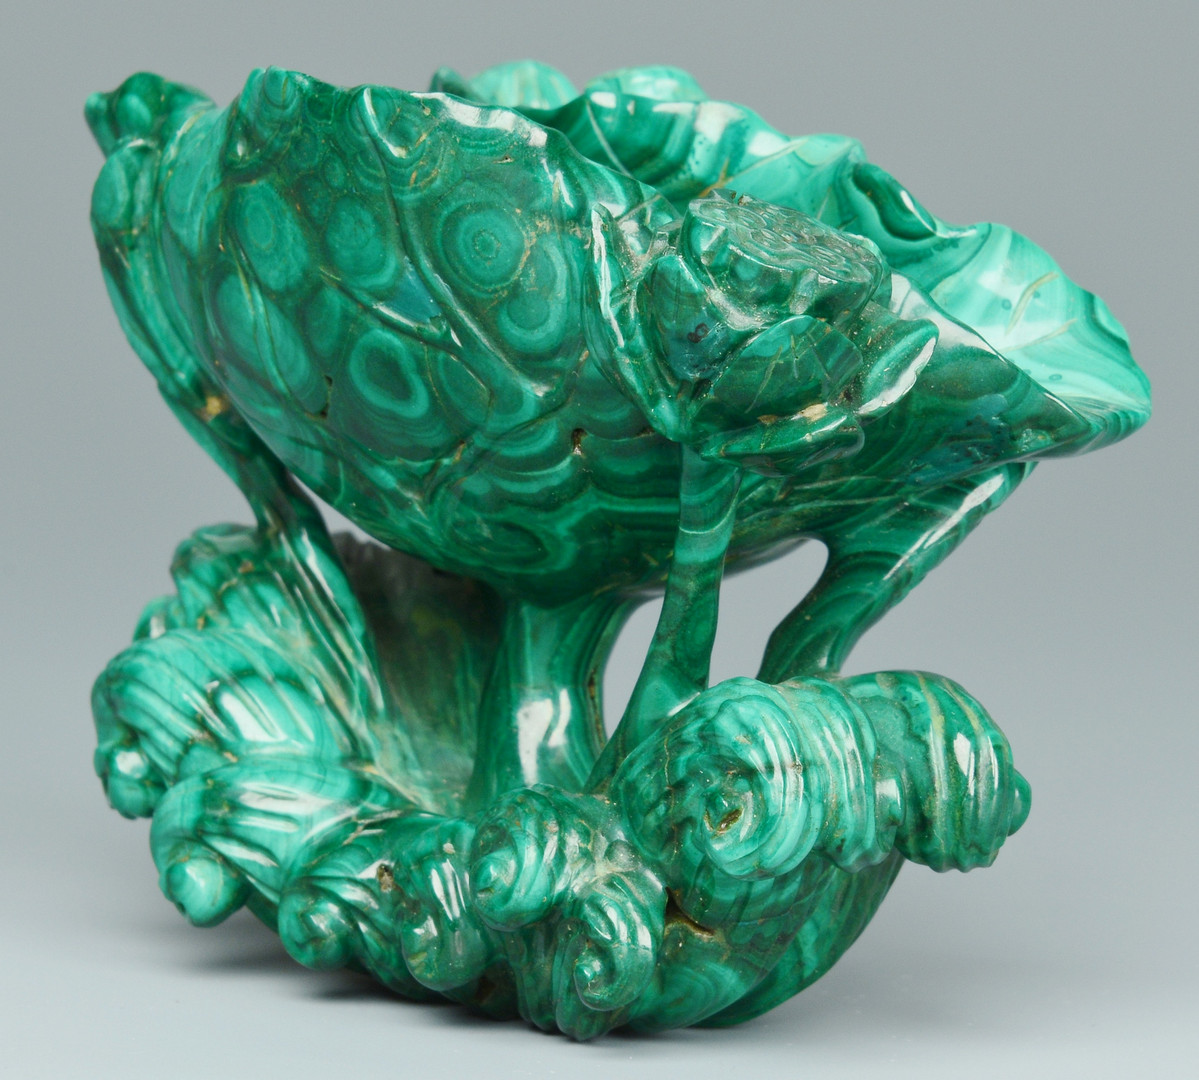 Lot 20: Malachite Libation Cup w/ Frog & Floral Carving